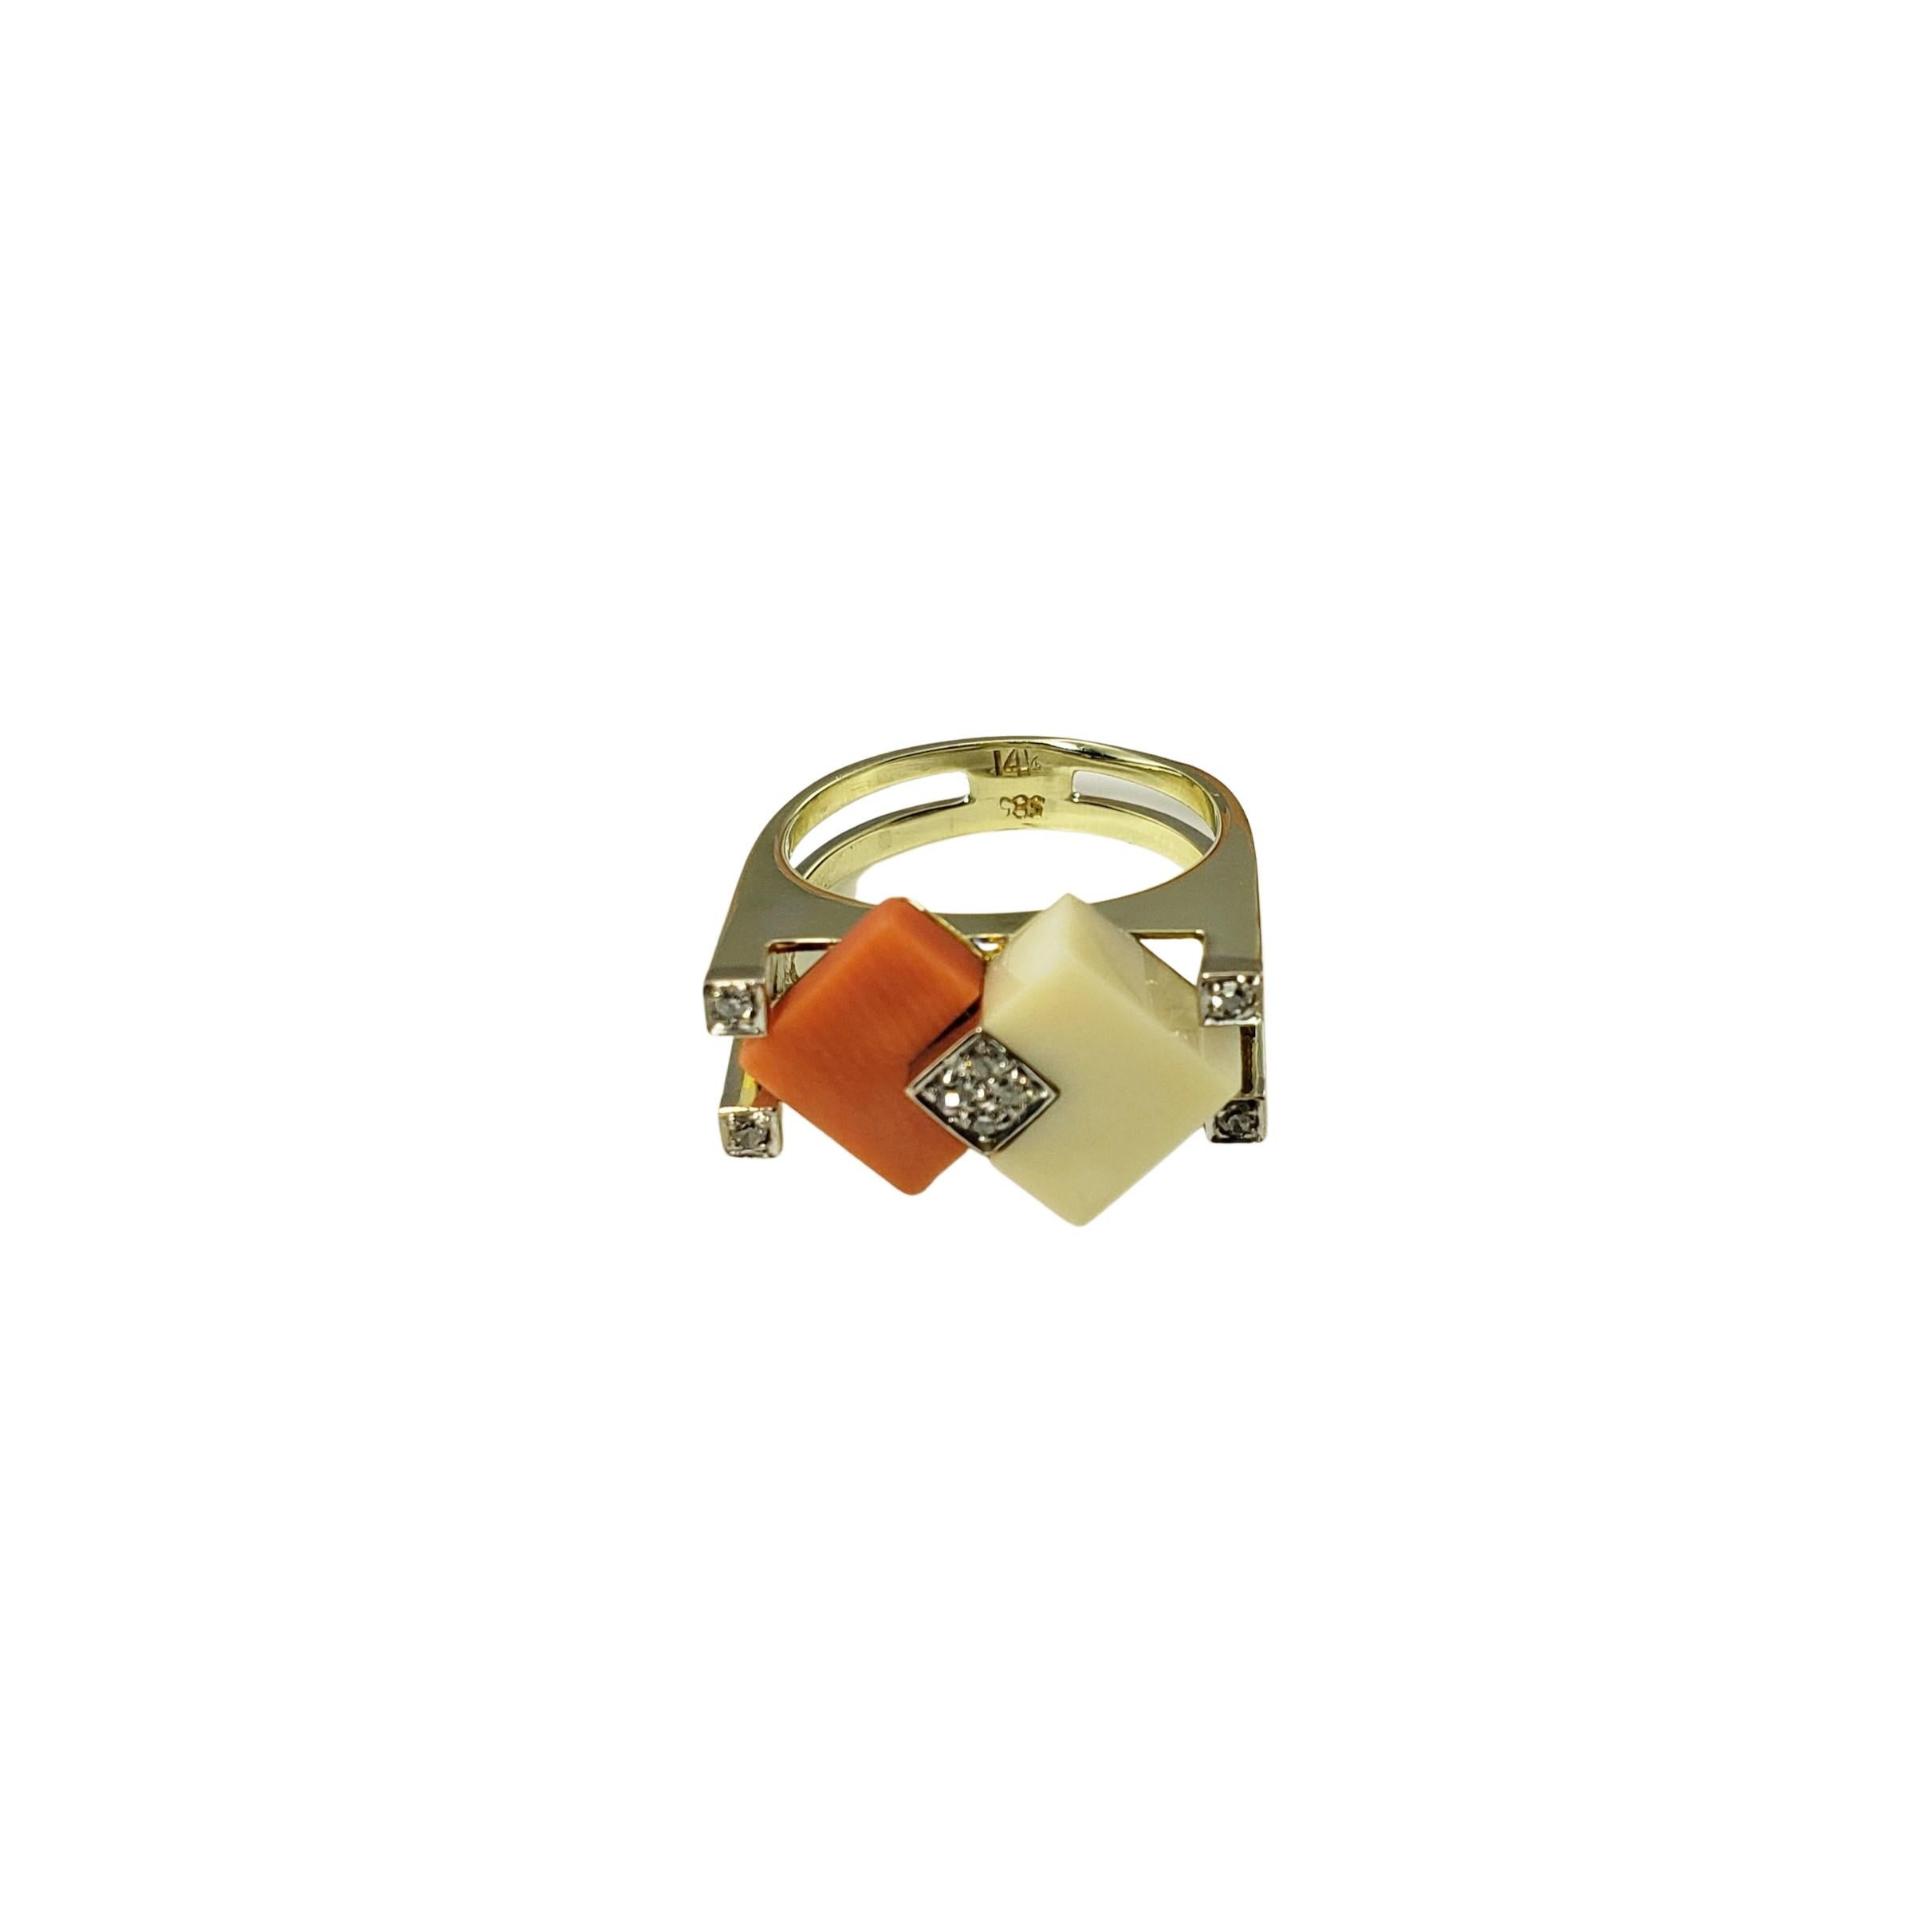 14 Karat Yellow Gold Stone and Diamond Ring Size 6.75-

This elegant ring features two colorful square stones (unknown composition) and eight round single cut diamonds set in beautifully detailed 14K yellow gold.  Width:  12 mm.  Shank:  4